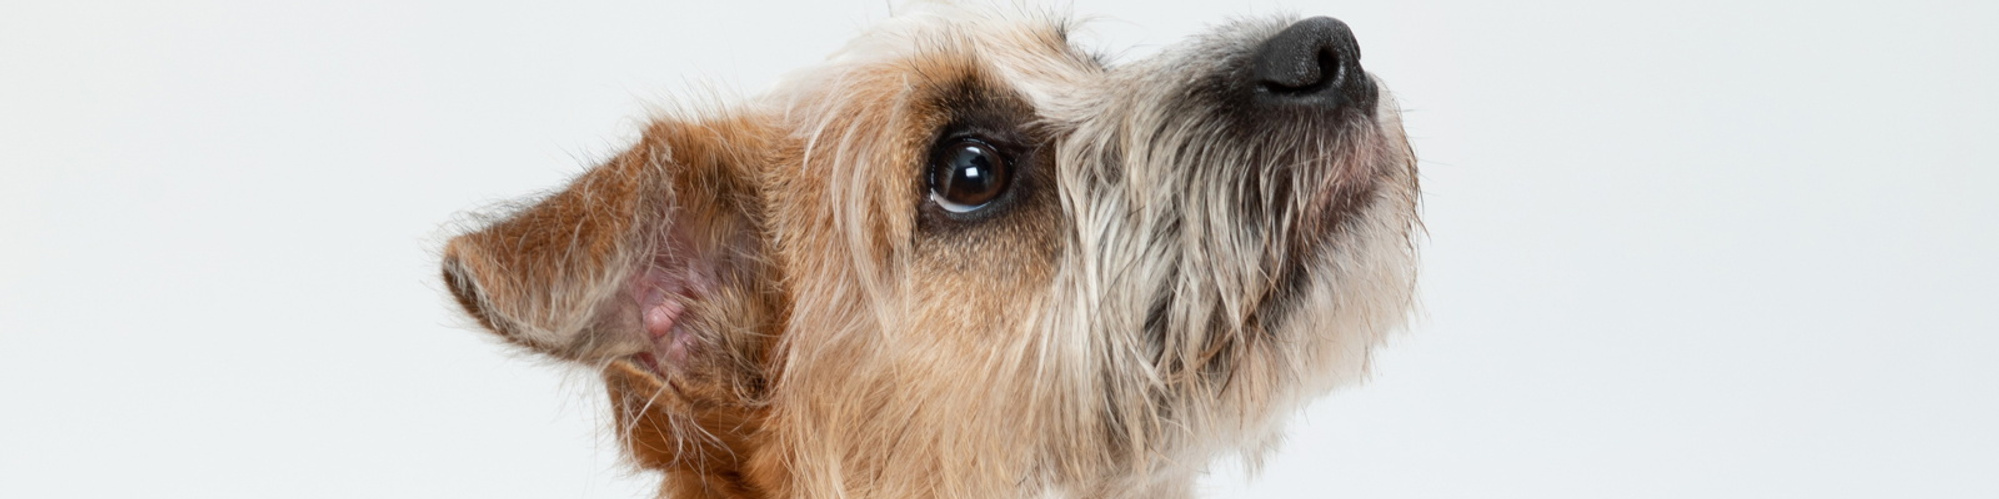 Unique portrait of a small dog looking upwards in professional pet photography studio Dublin 